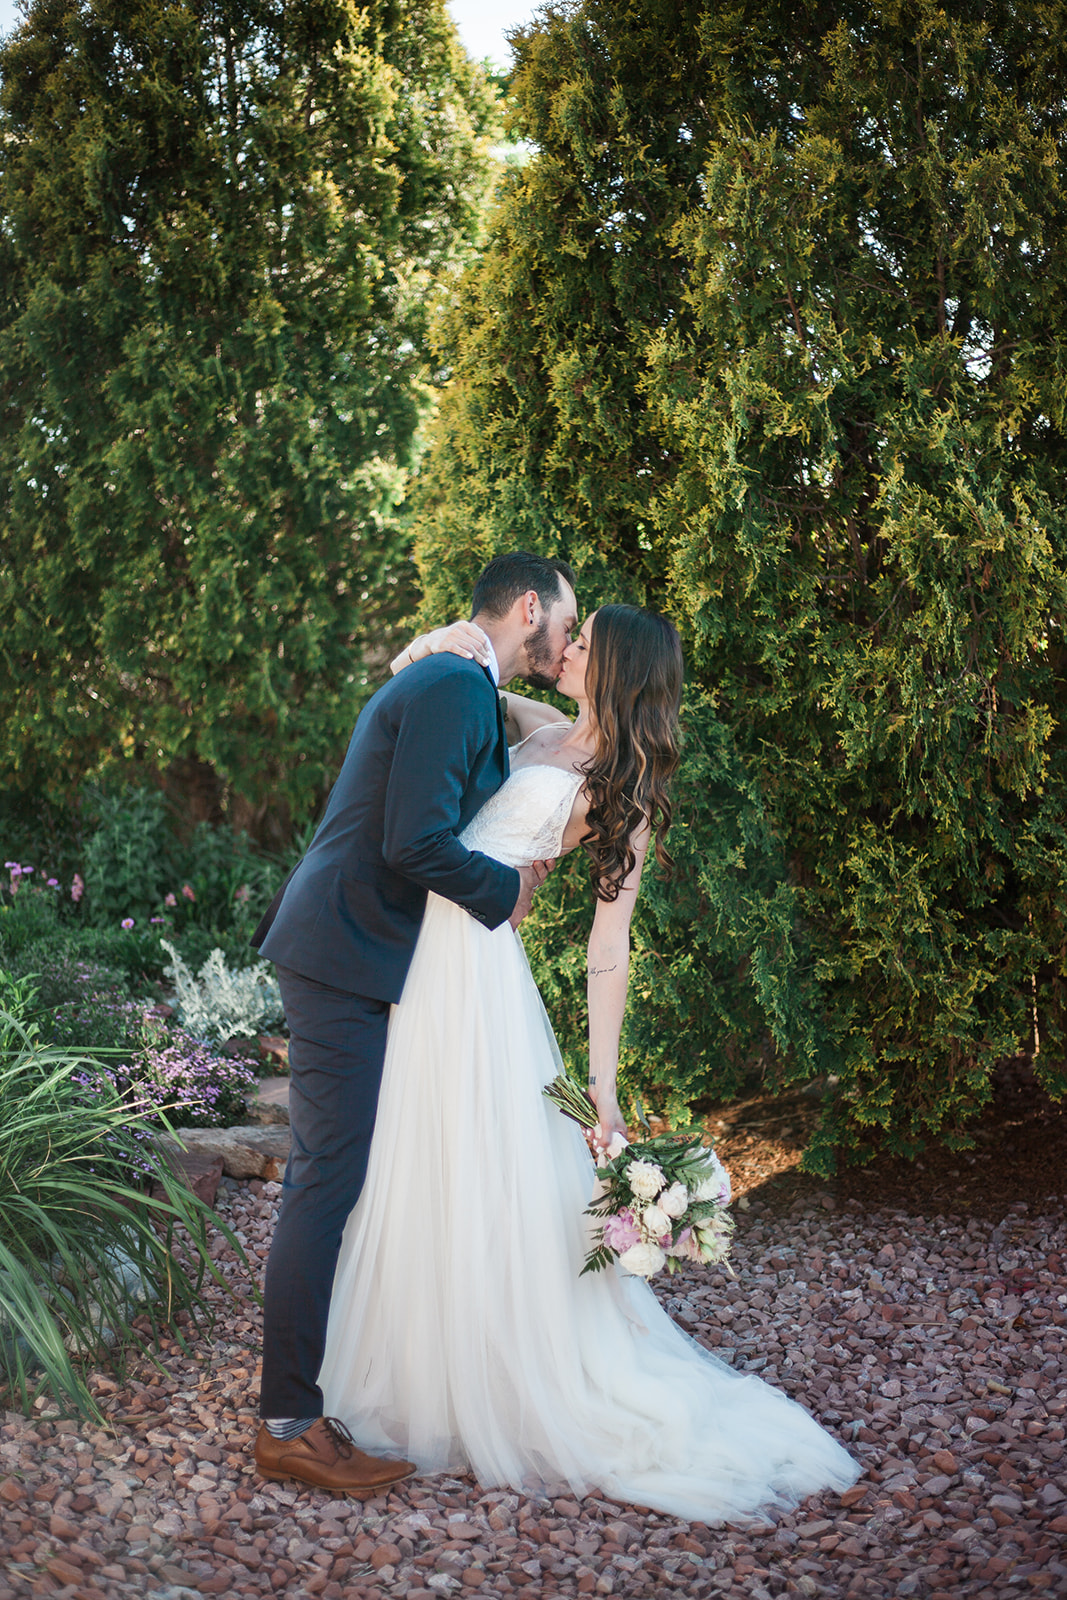 groom dipping bride in front of pine trees in intimate backyard portrait